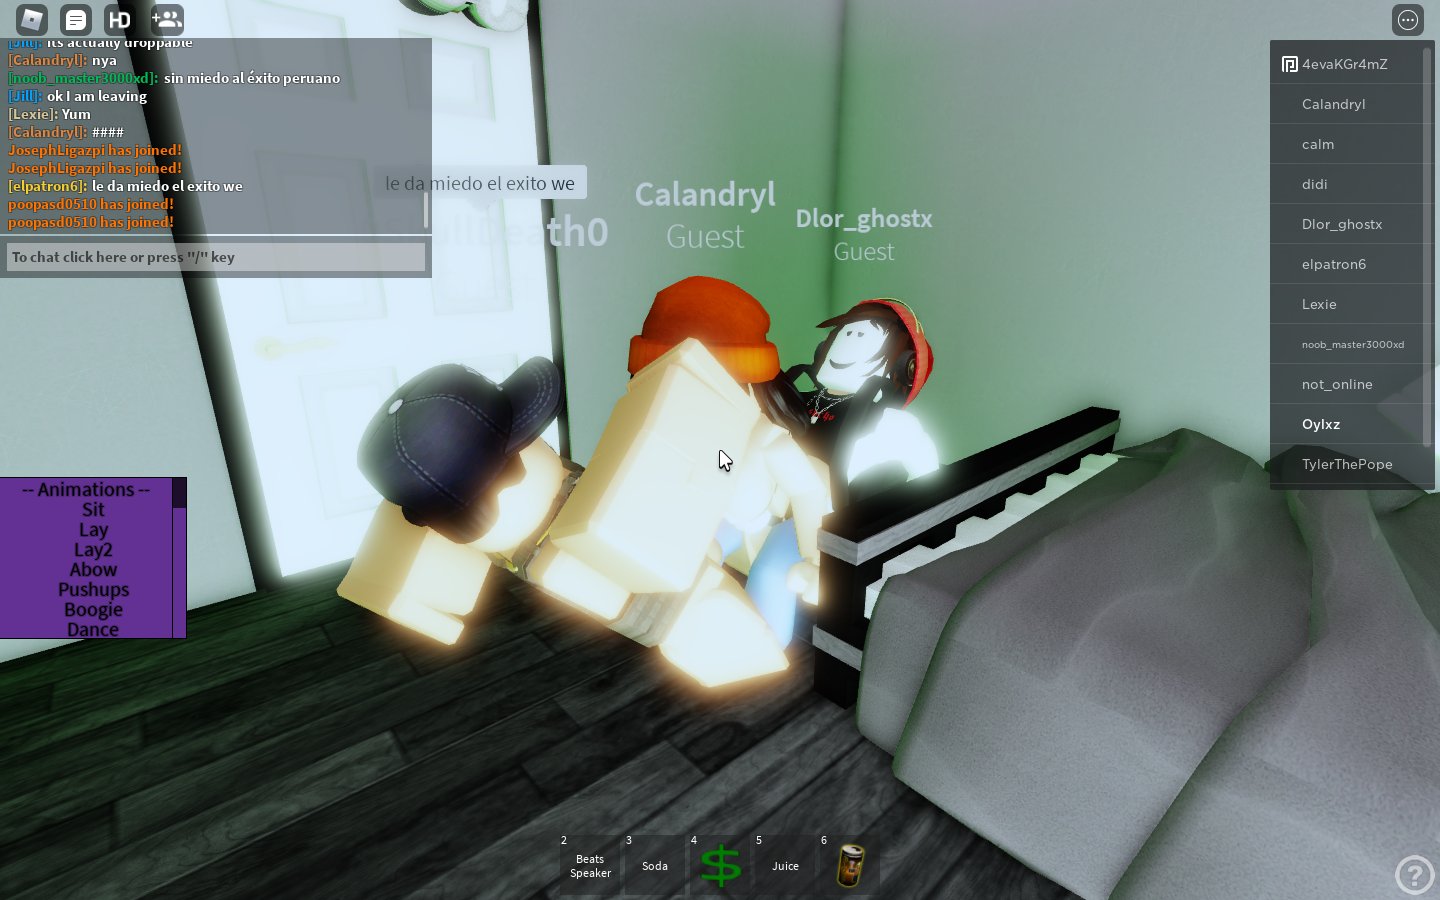 c3 on X: Roblox R15 con servers :'D(Giving Creds to @Lilix_RR34)  #robloxcondo  / X